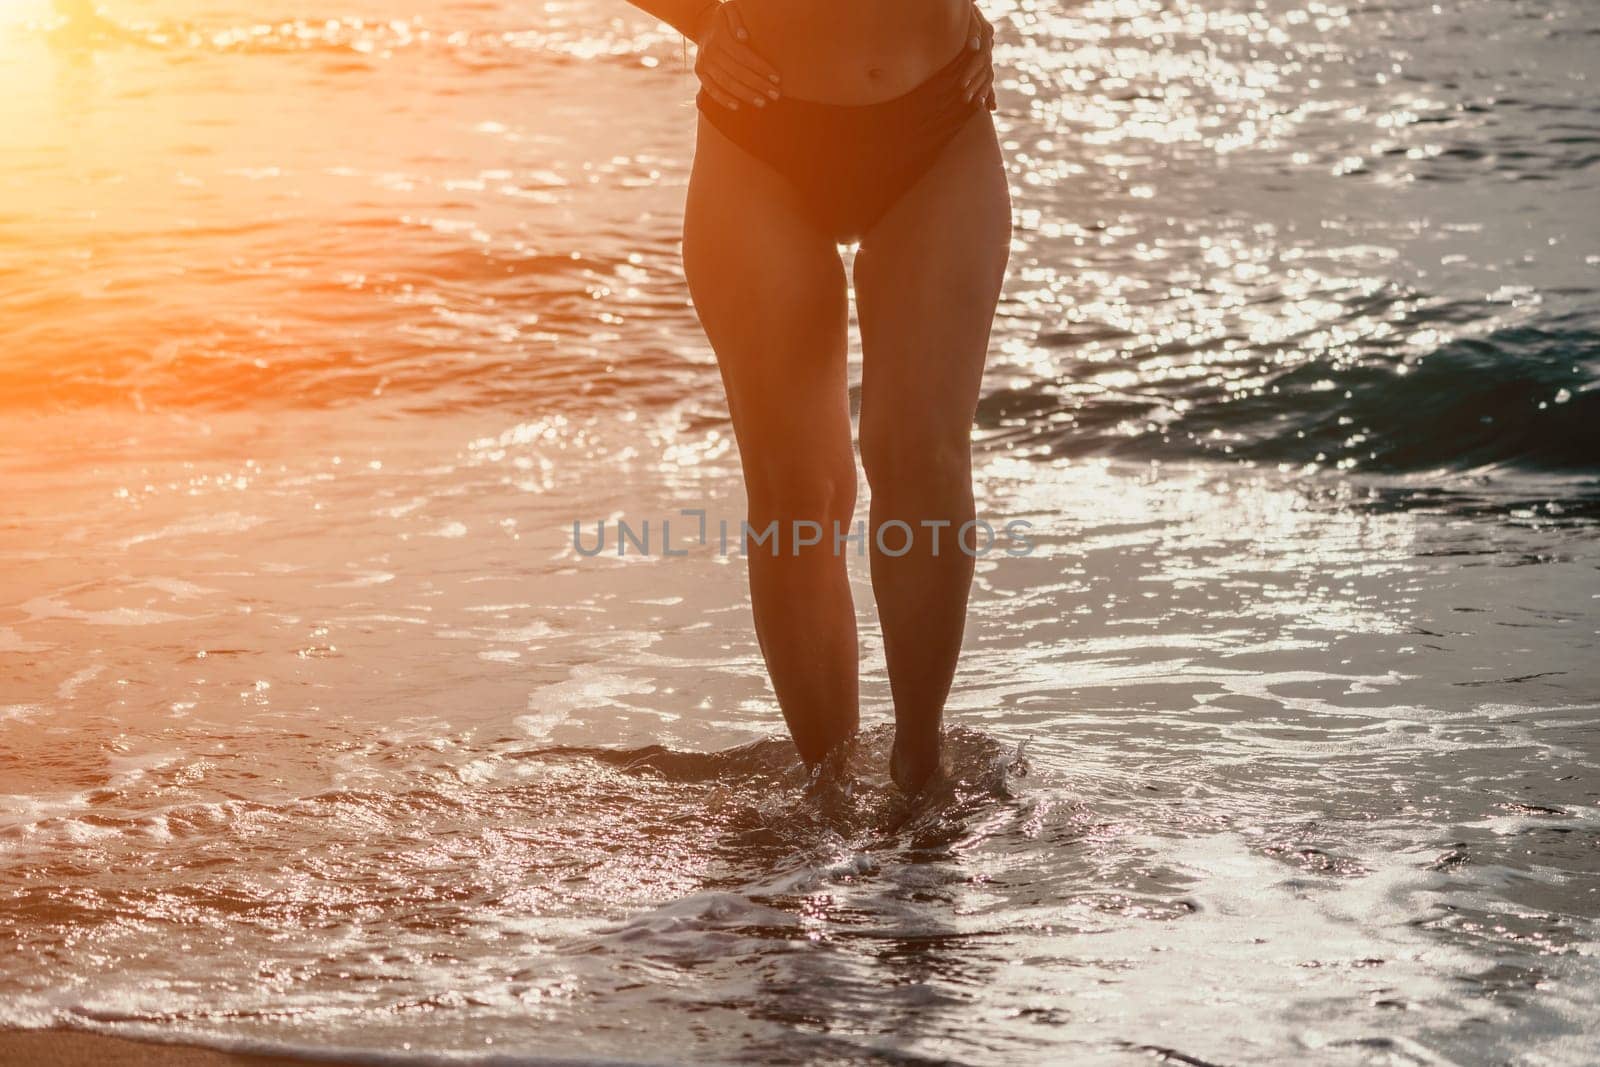 Woman summer travel sea. Happy woman enjoying her summer travels, captured in a lower body portrait, taking photos to preserve her memories of the scenic sea beach sharing travel adventure journey by panophotograph